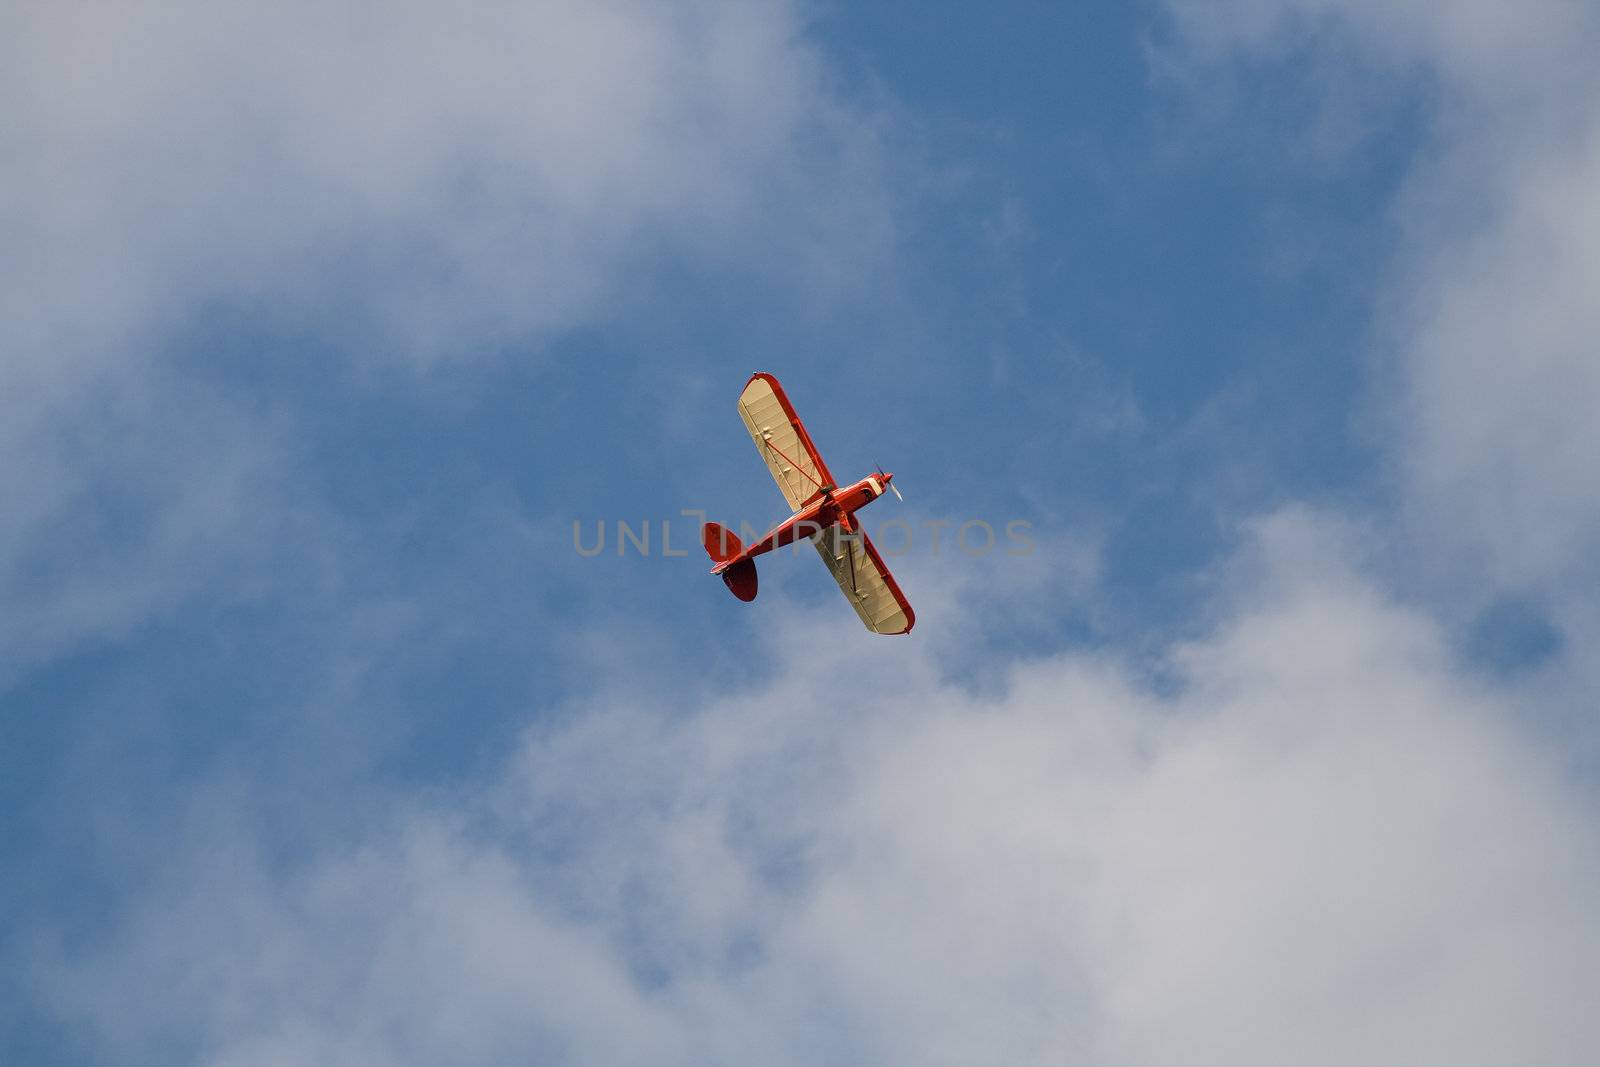 Flying small private airplane against blue cloudy sky